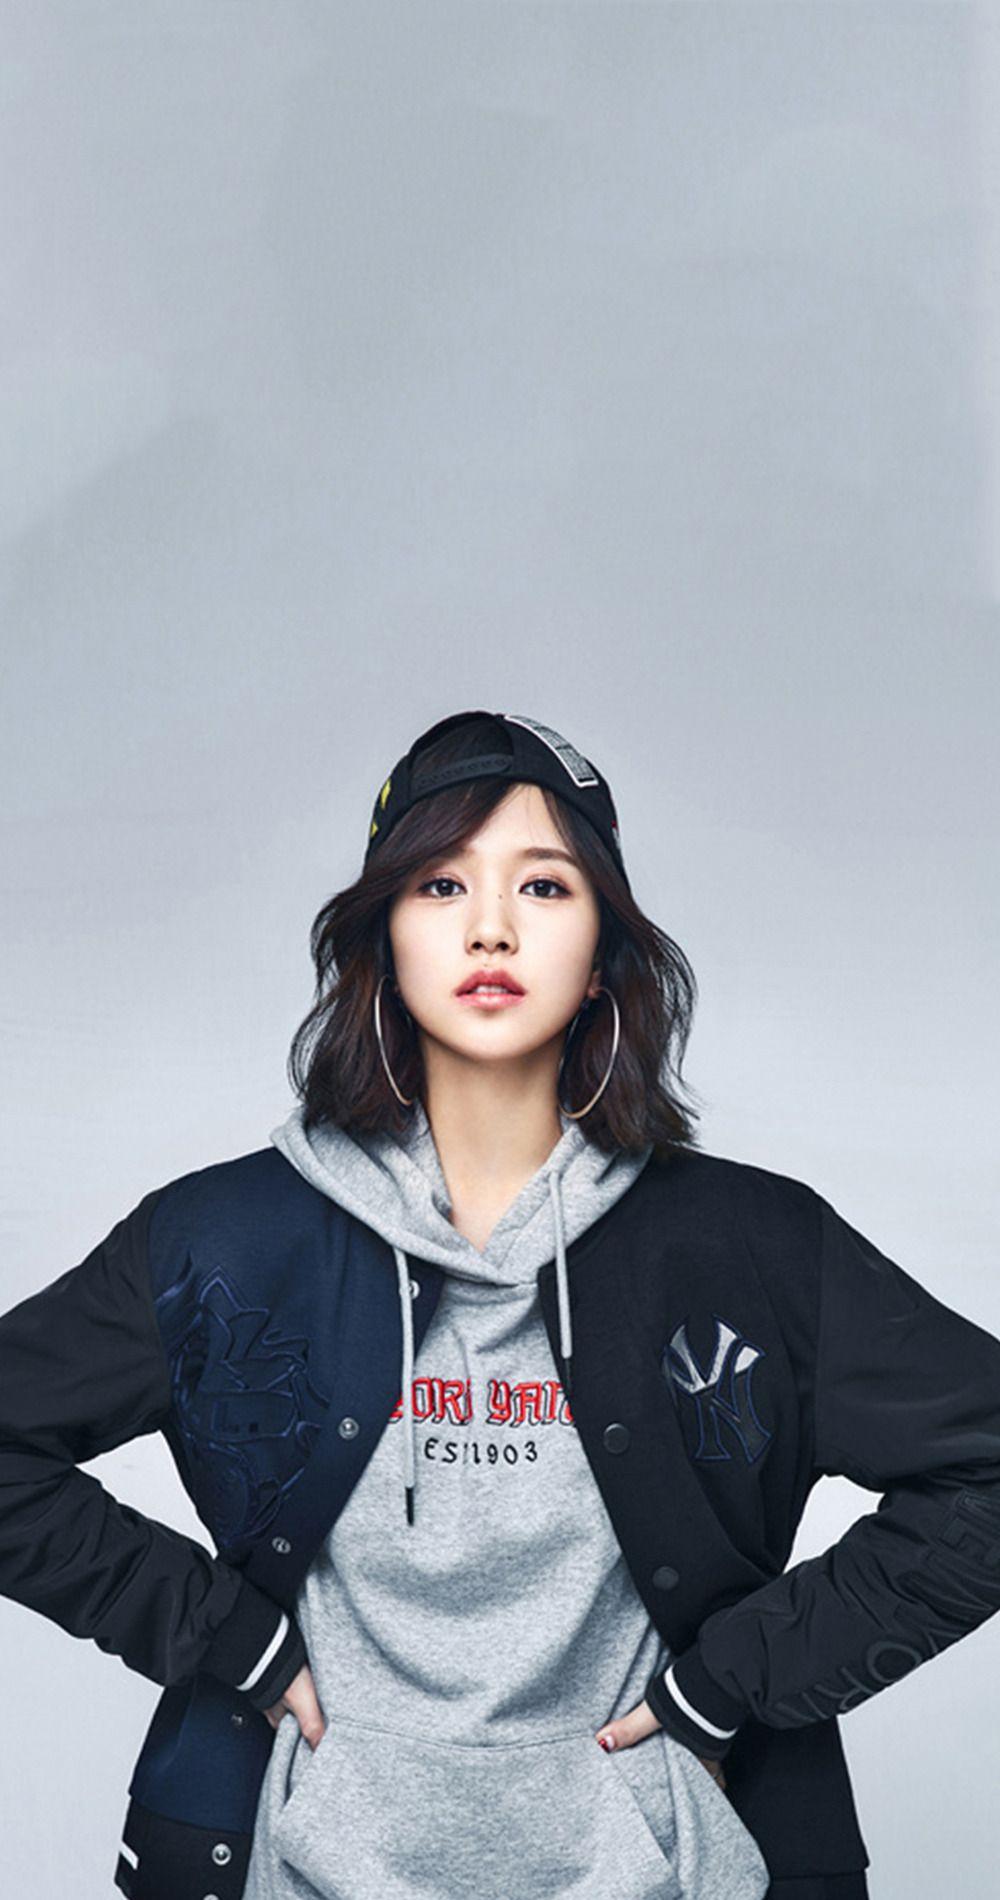 Mina Twice Wallpapers - Wallpaper Cave